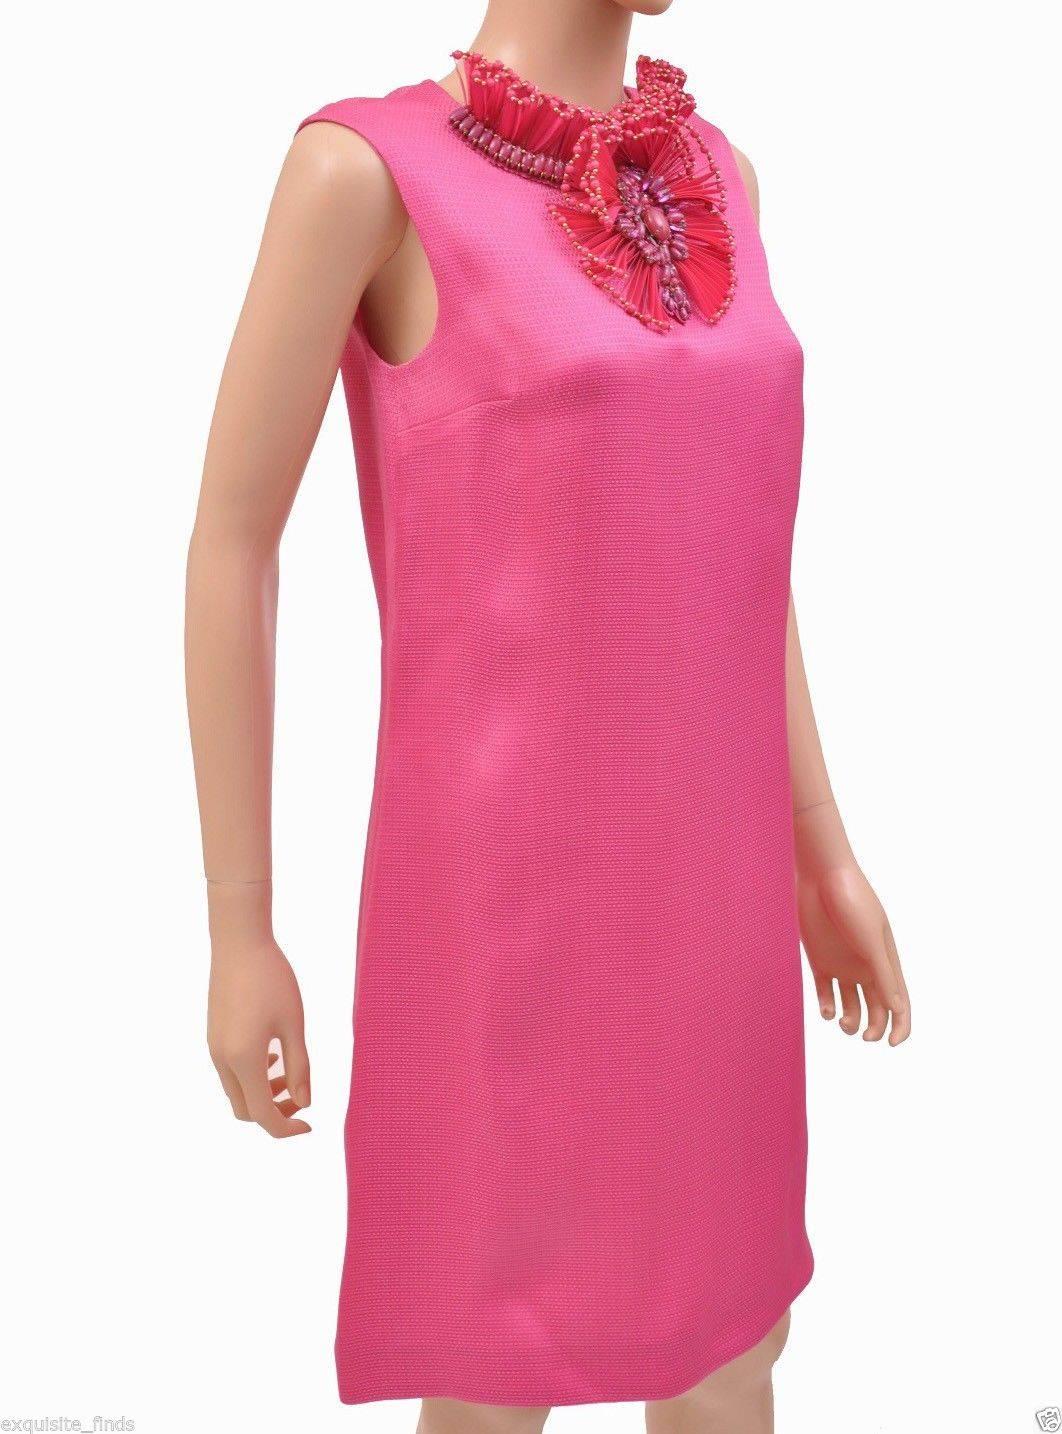 GUCCI RAFFIA DRESS 

100% silk
Hot pink
Discreet back zipper
Floral embellishment around the neck
Fully lined
Made in Italy
Size 40 or US 4